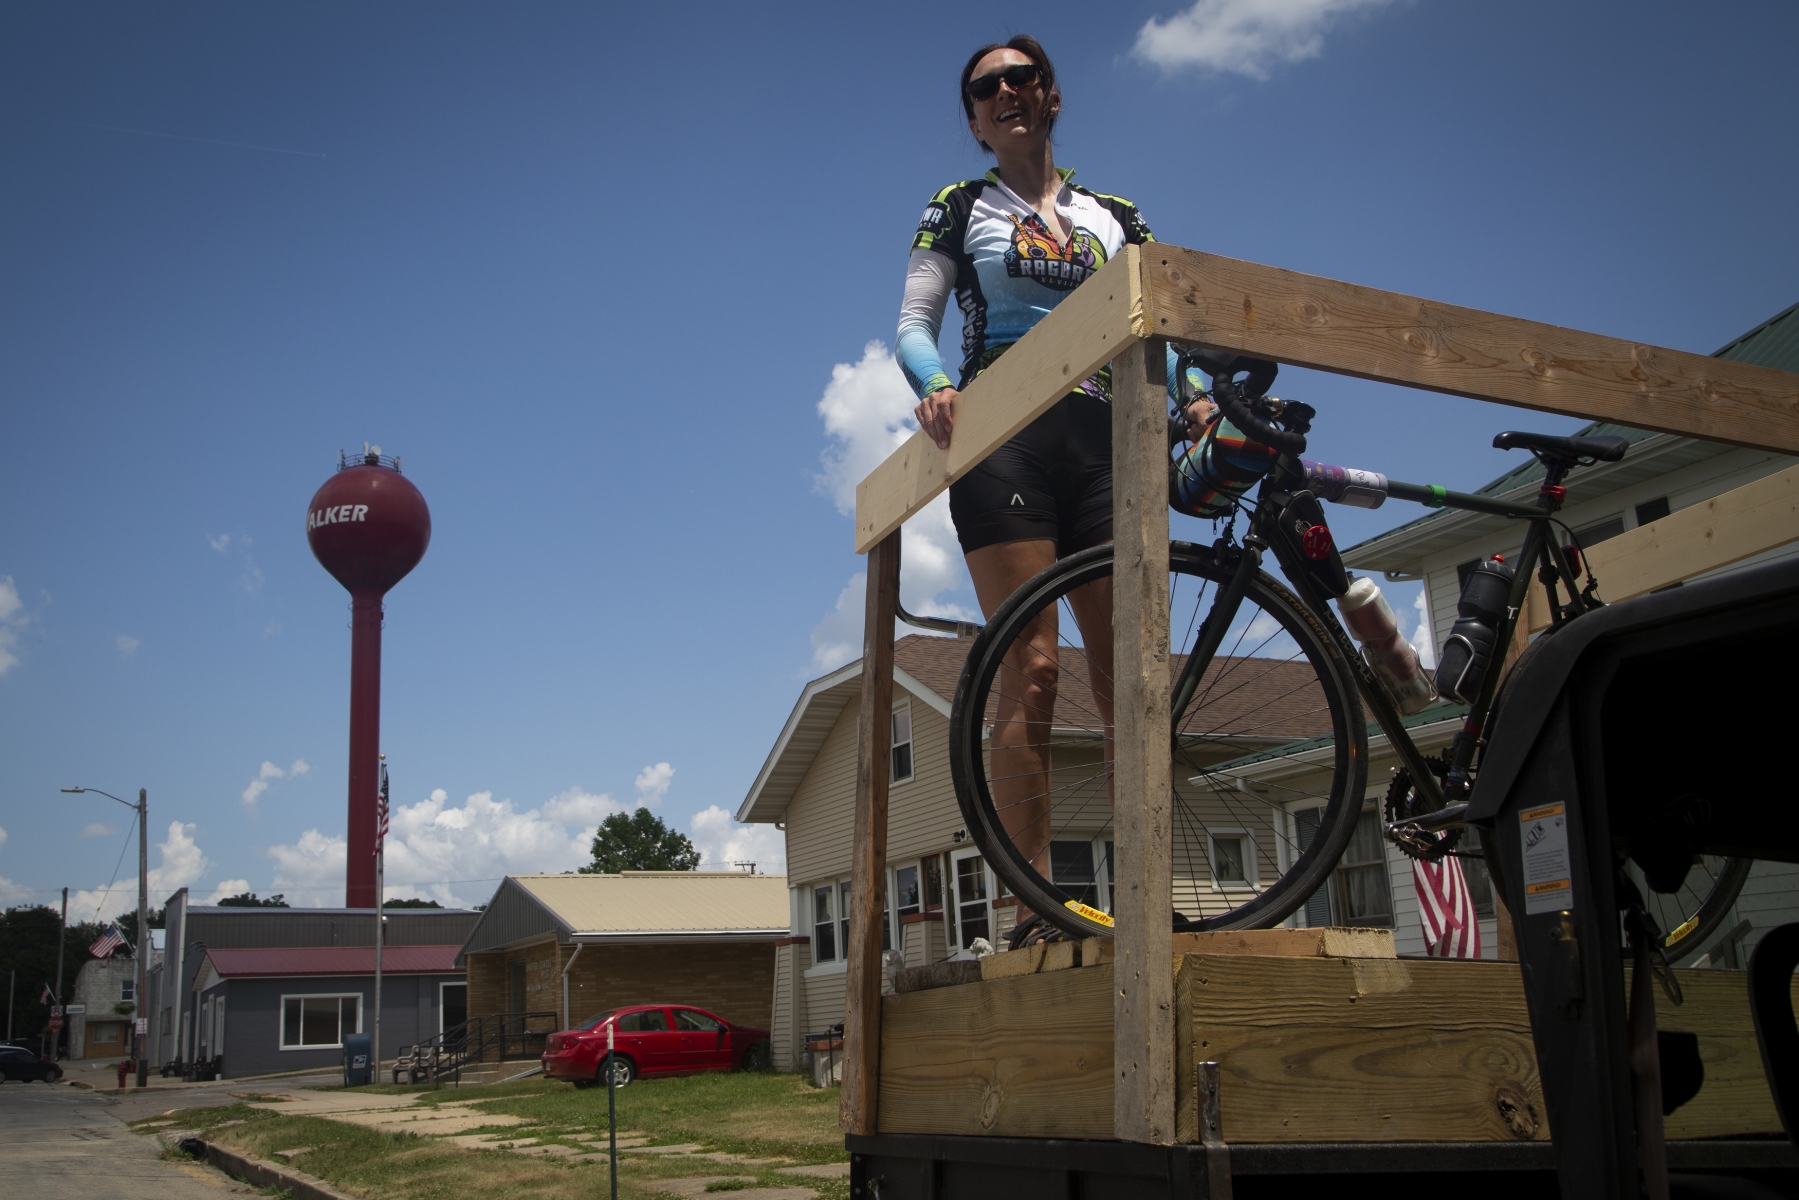 RAGBRAI's Andrea Parrott takes a ride in an ATV lift in Walker during the RAGBRAI route inspection ride on Thursday, June 10, 2021. Day 5 of the route brings riders from Waterloo through the meeting town of Center Point to Anamosa. Riders also have the option of doing the Karras loop, bring the days total mileage to about 110.